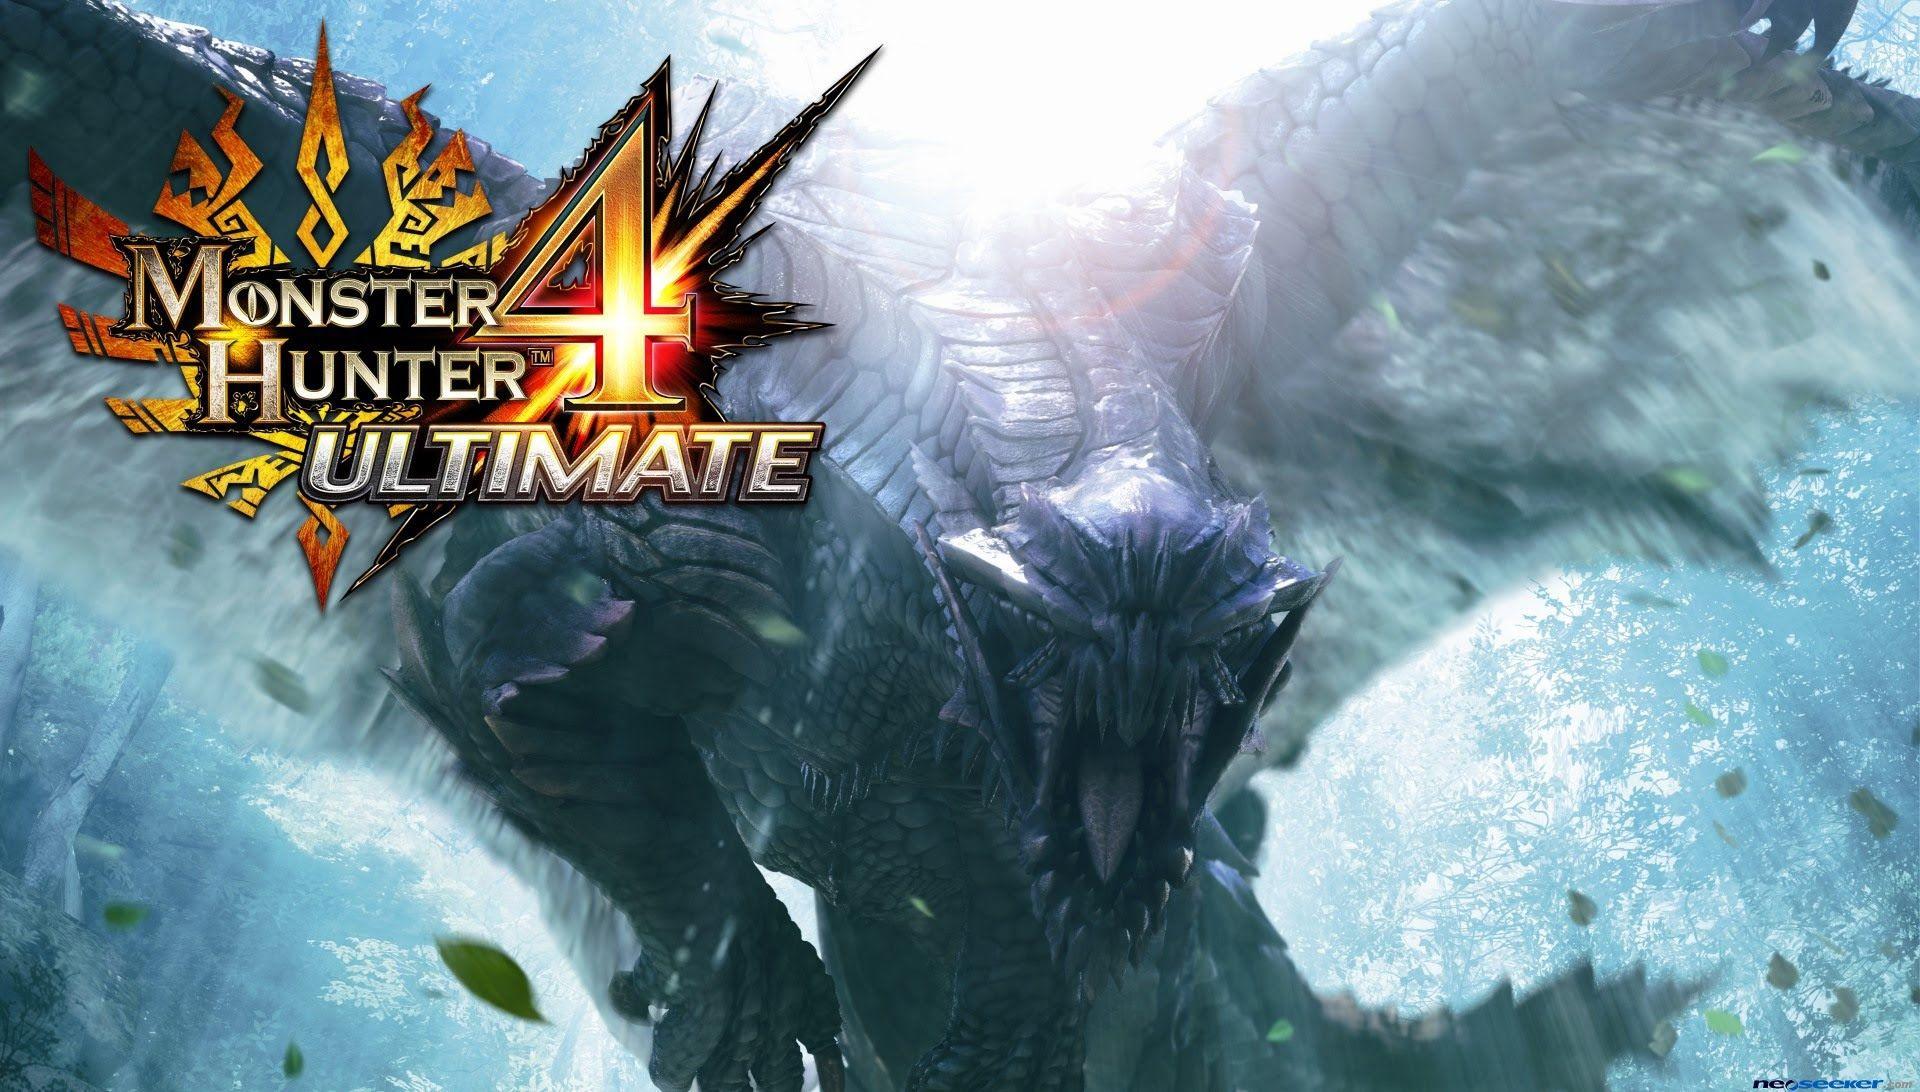 Monster hunter 4 ultimate on 2ds 2 quests